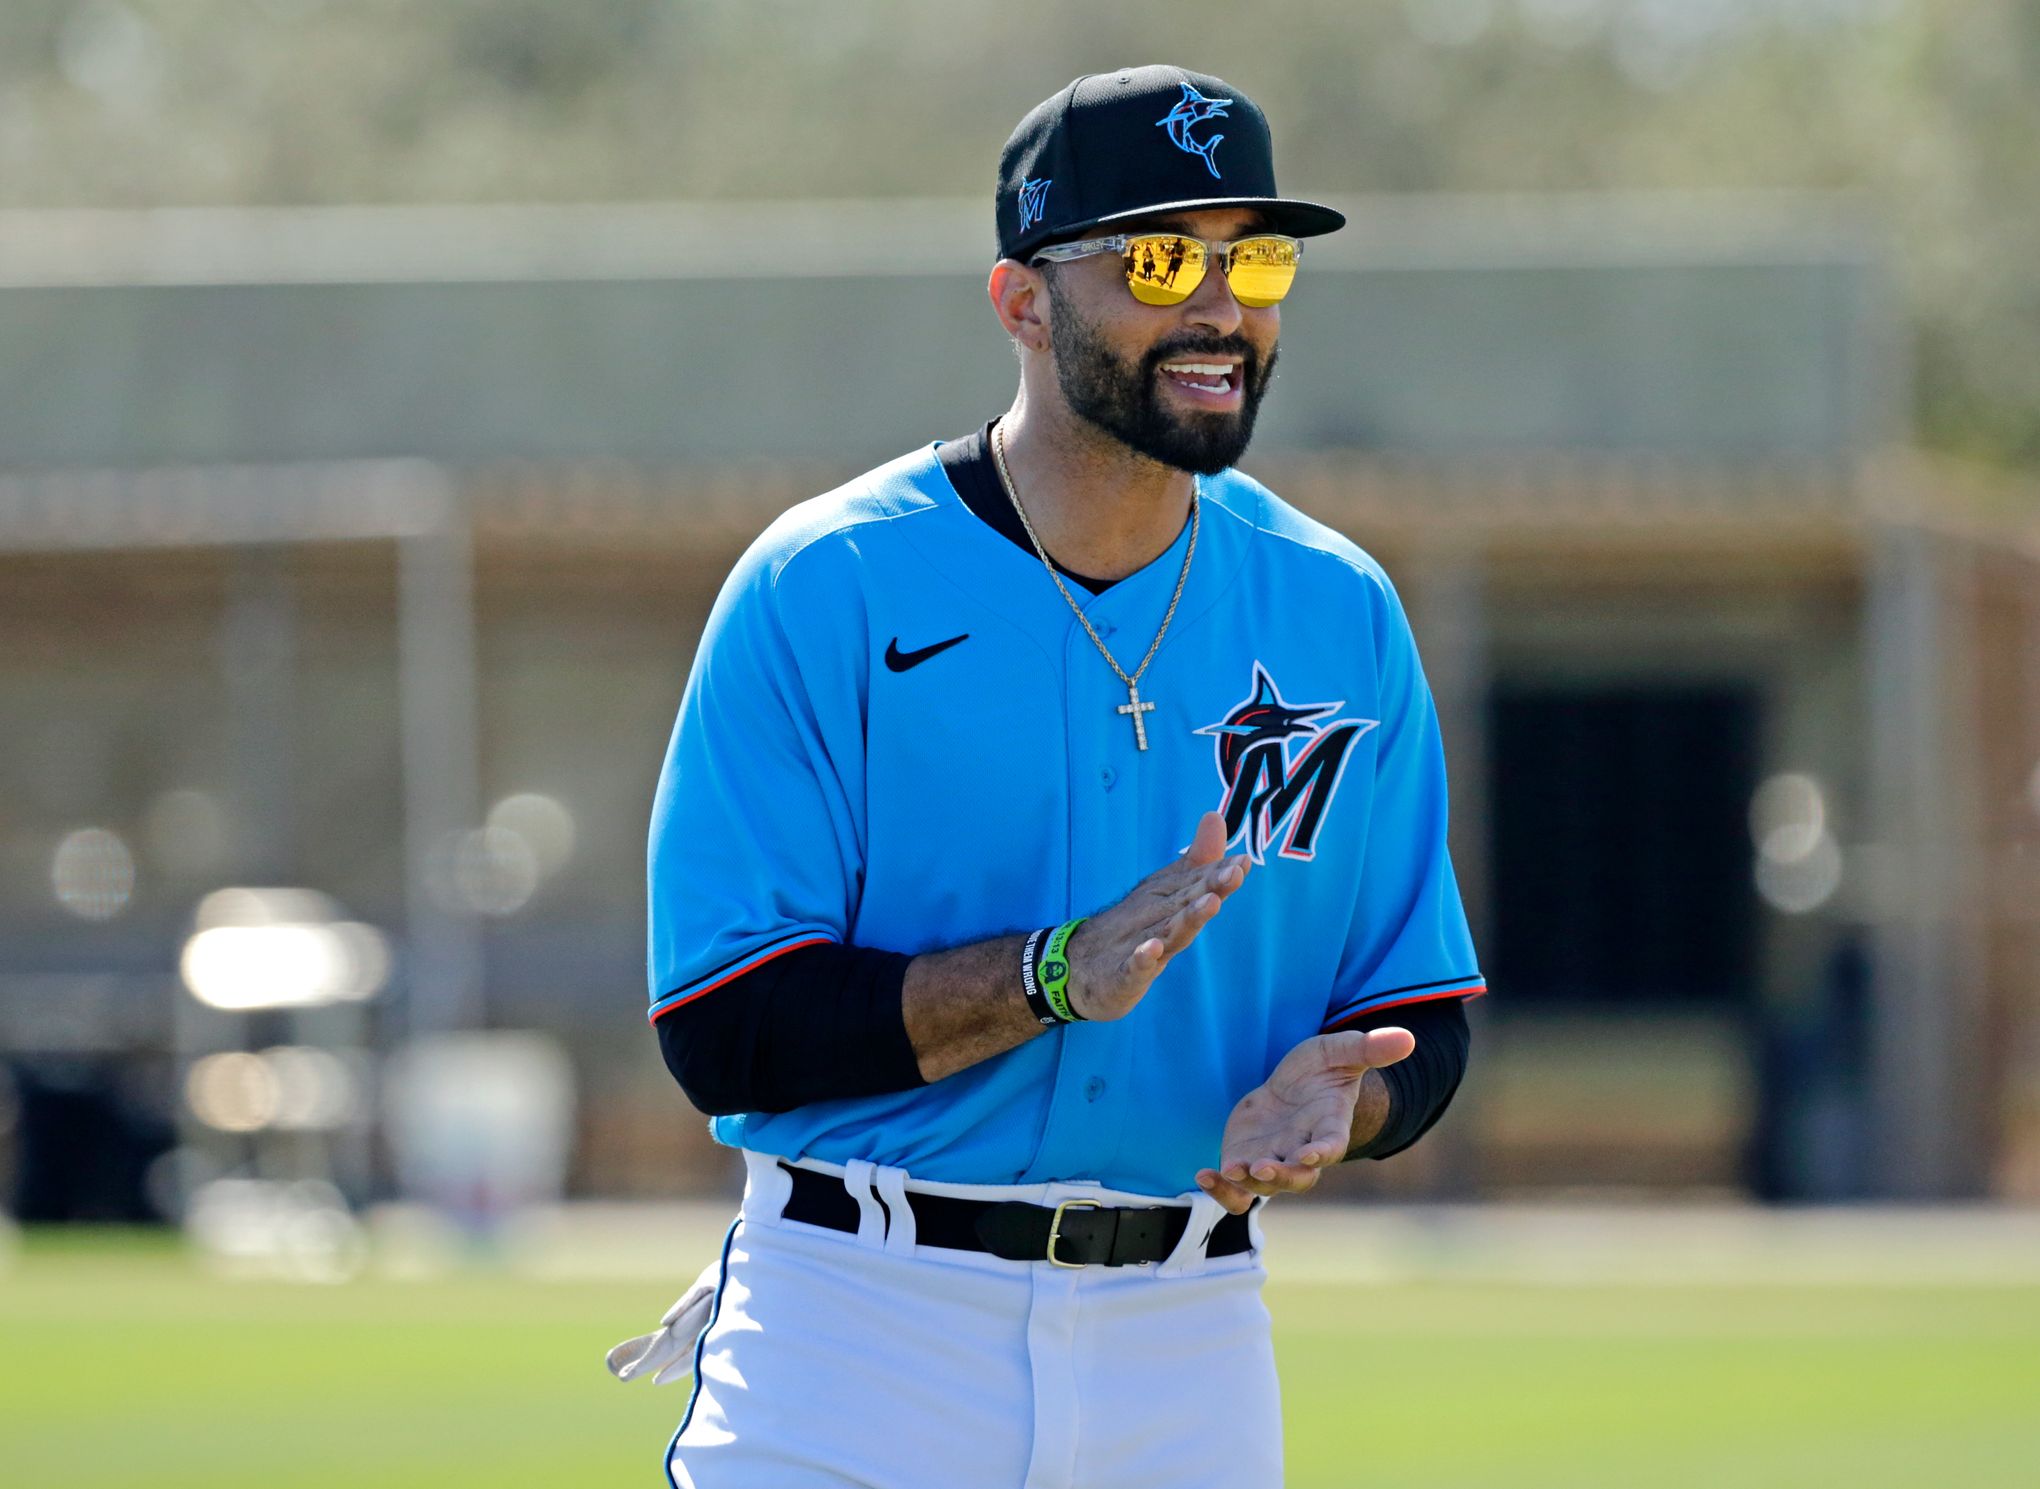 The wall won' — Kemp tries to revive career with Marlins